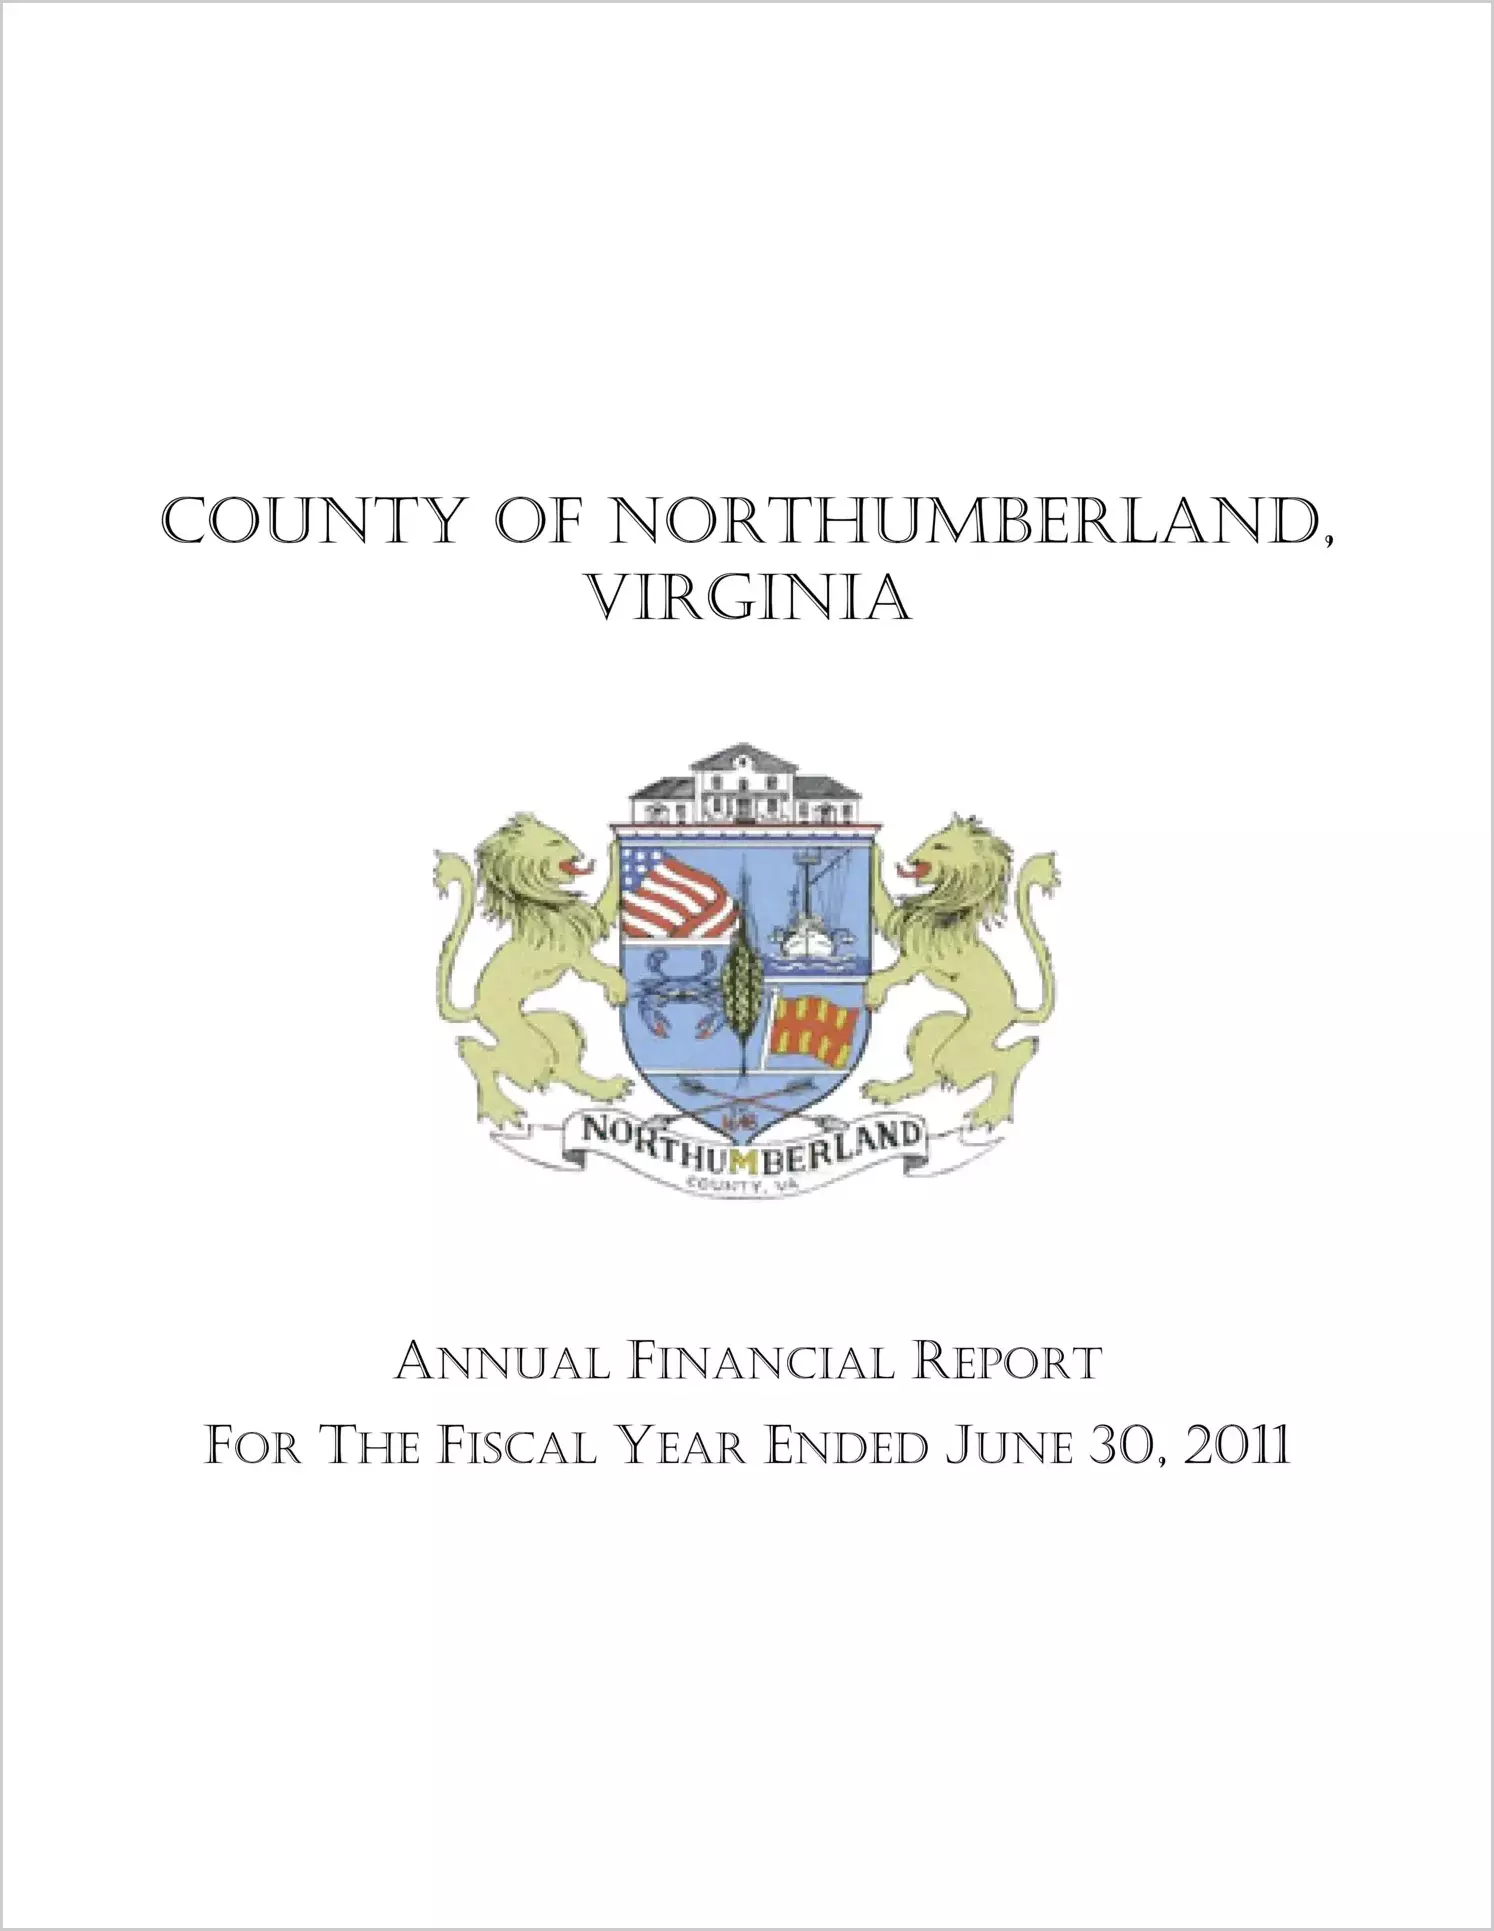 2010 Annual Financial Report for County of Northumberland